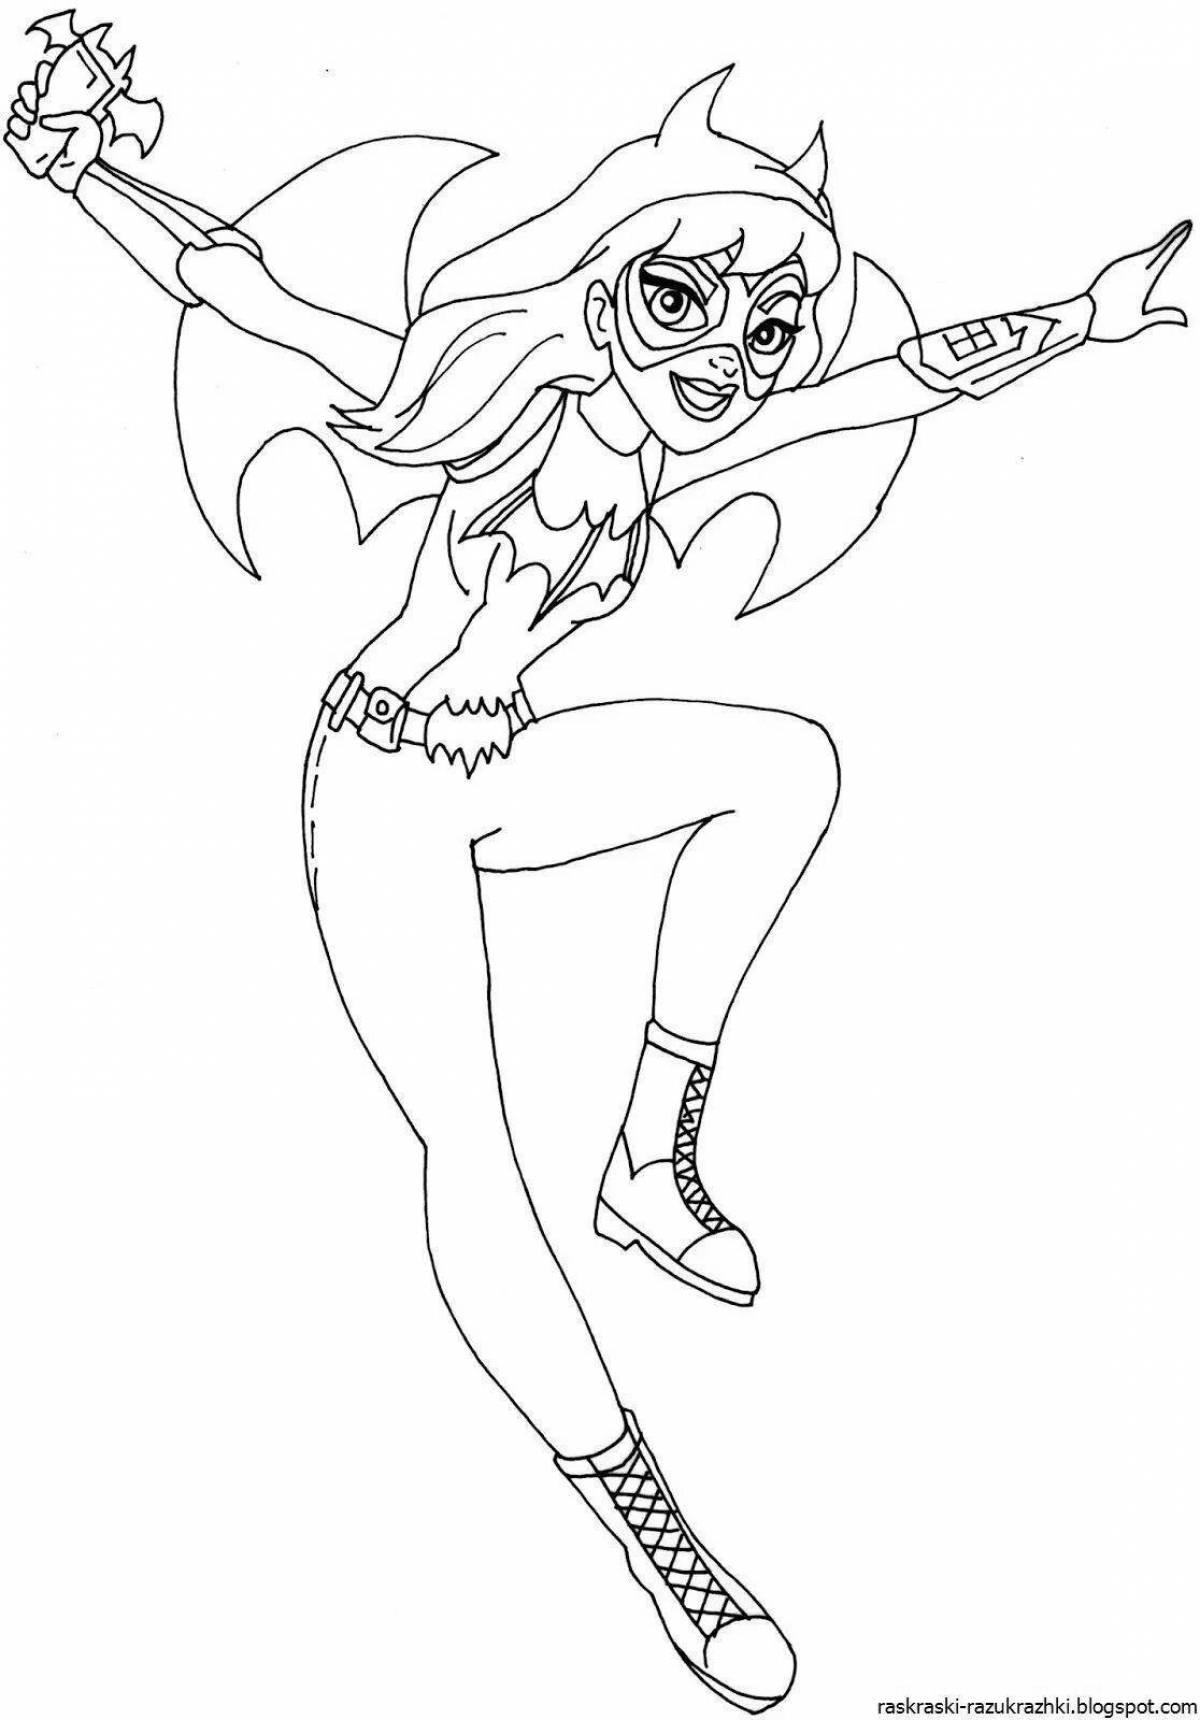 Fun coloring pages for superhero girls